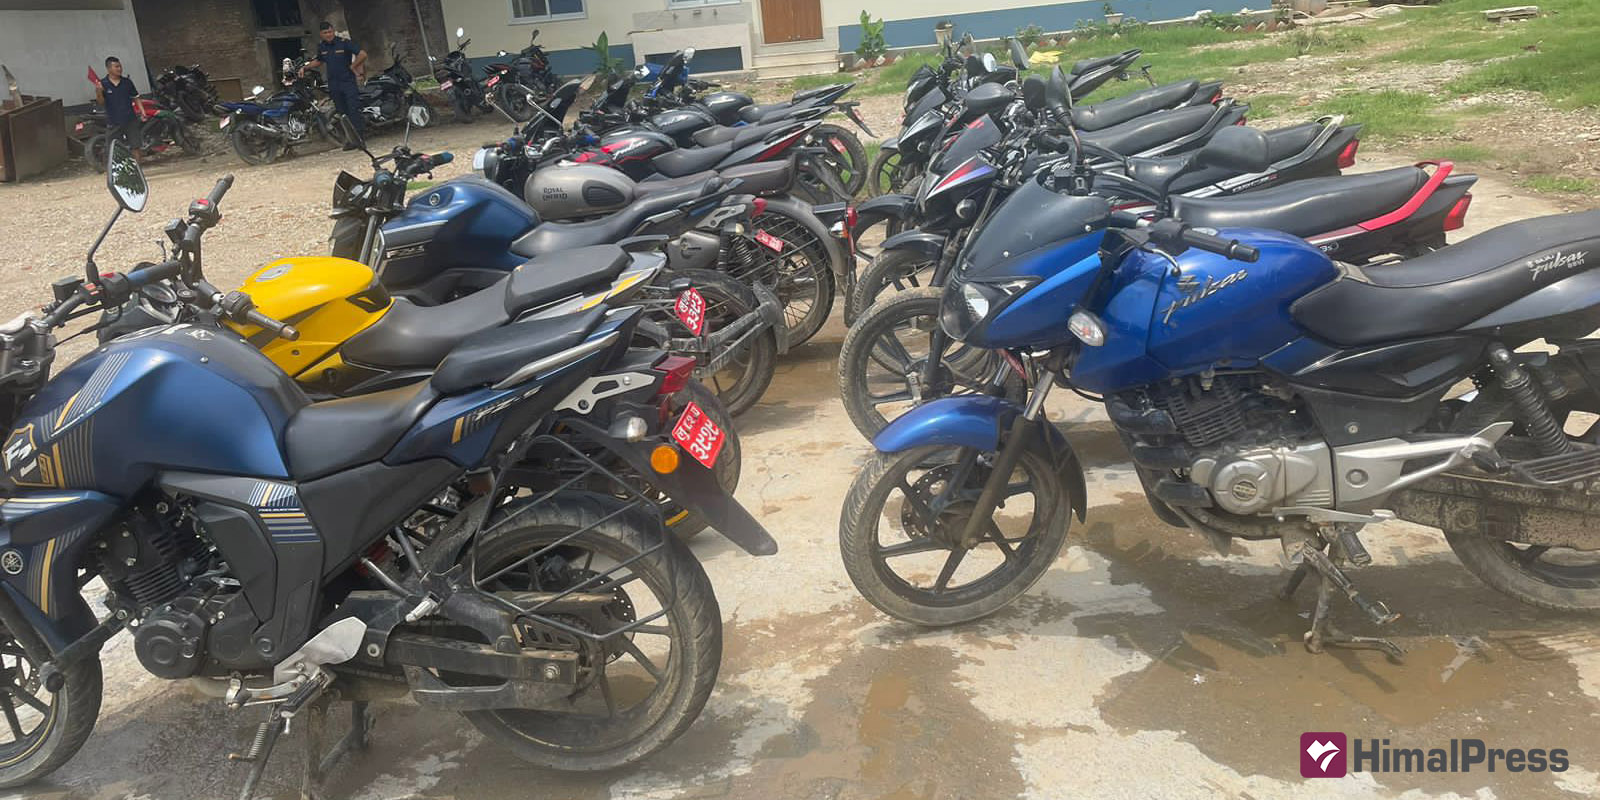 Bike-lifting racket busted in Butwal; 12 arrested